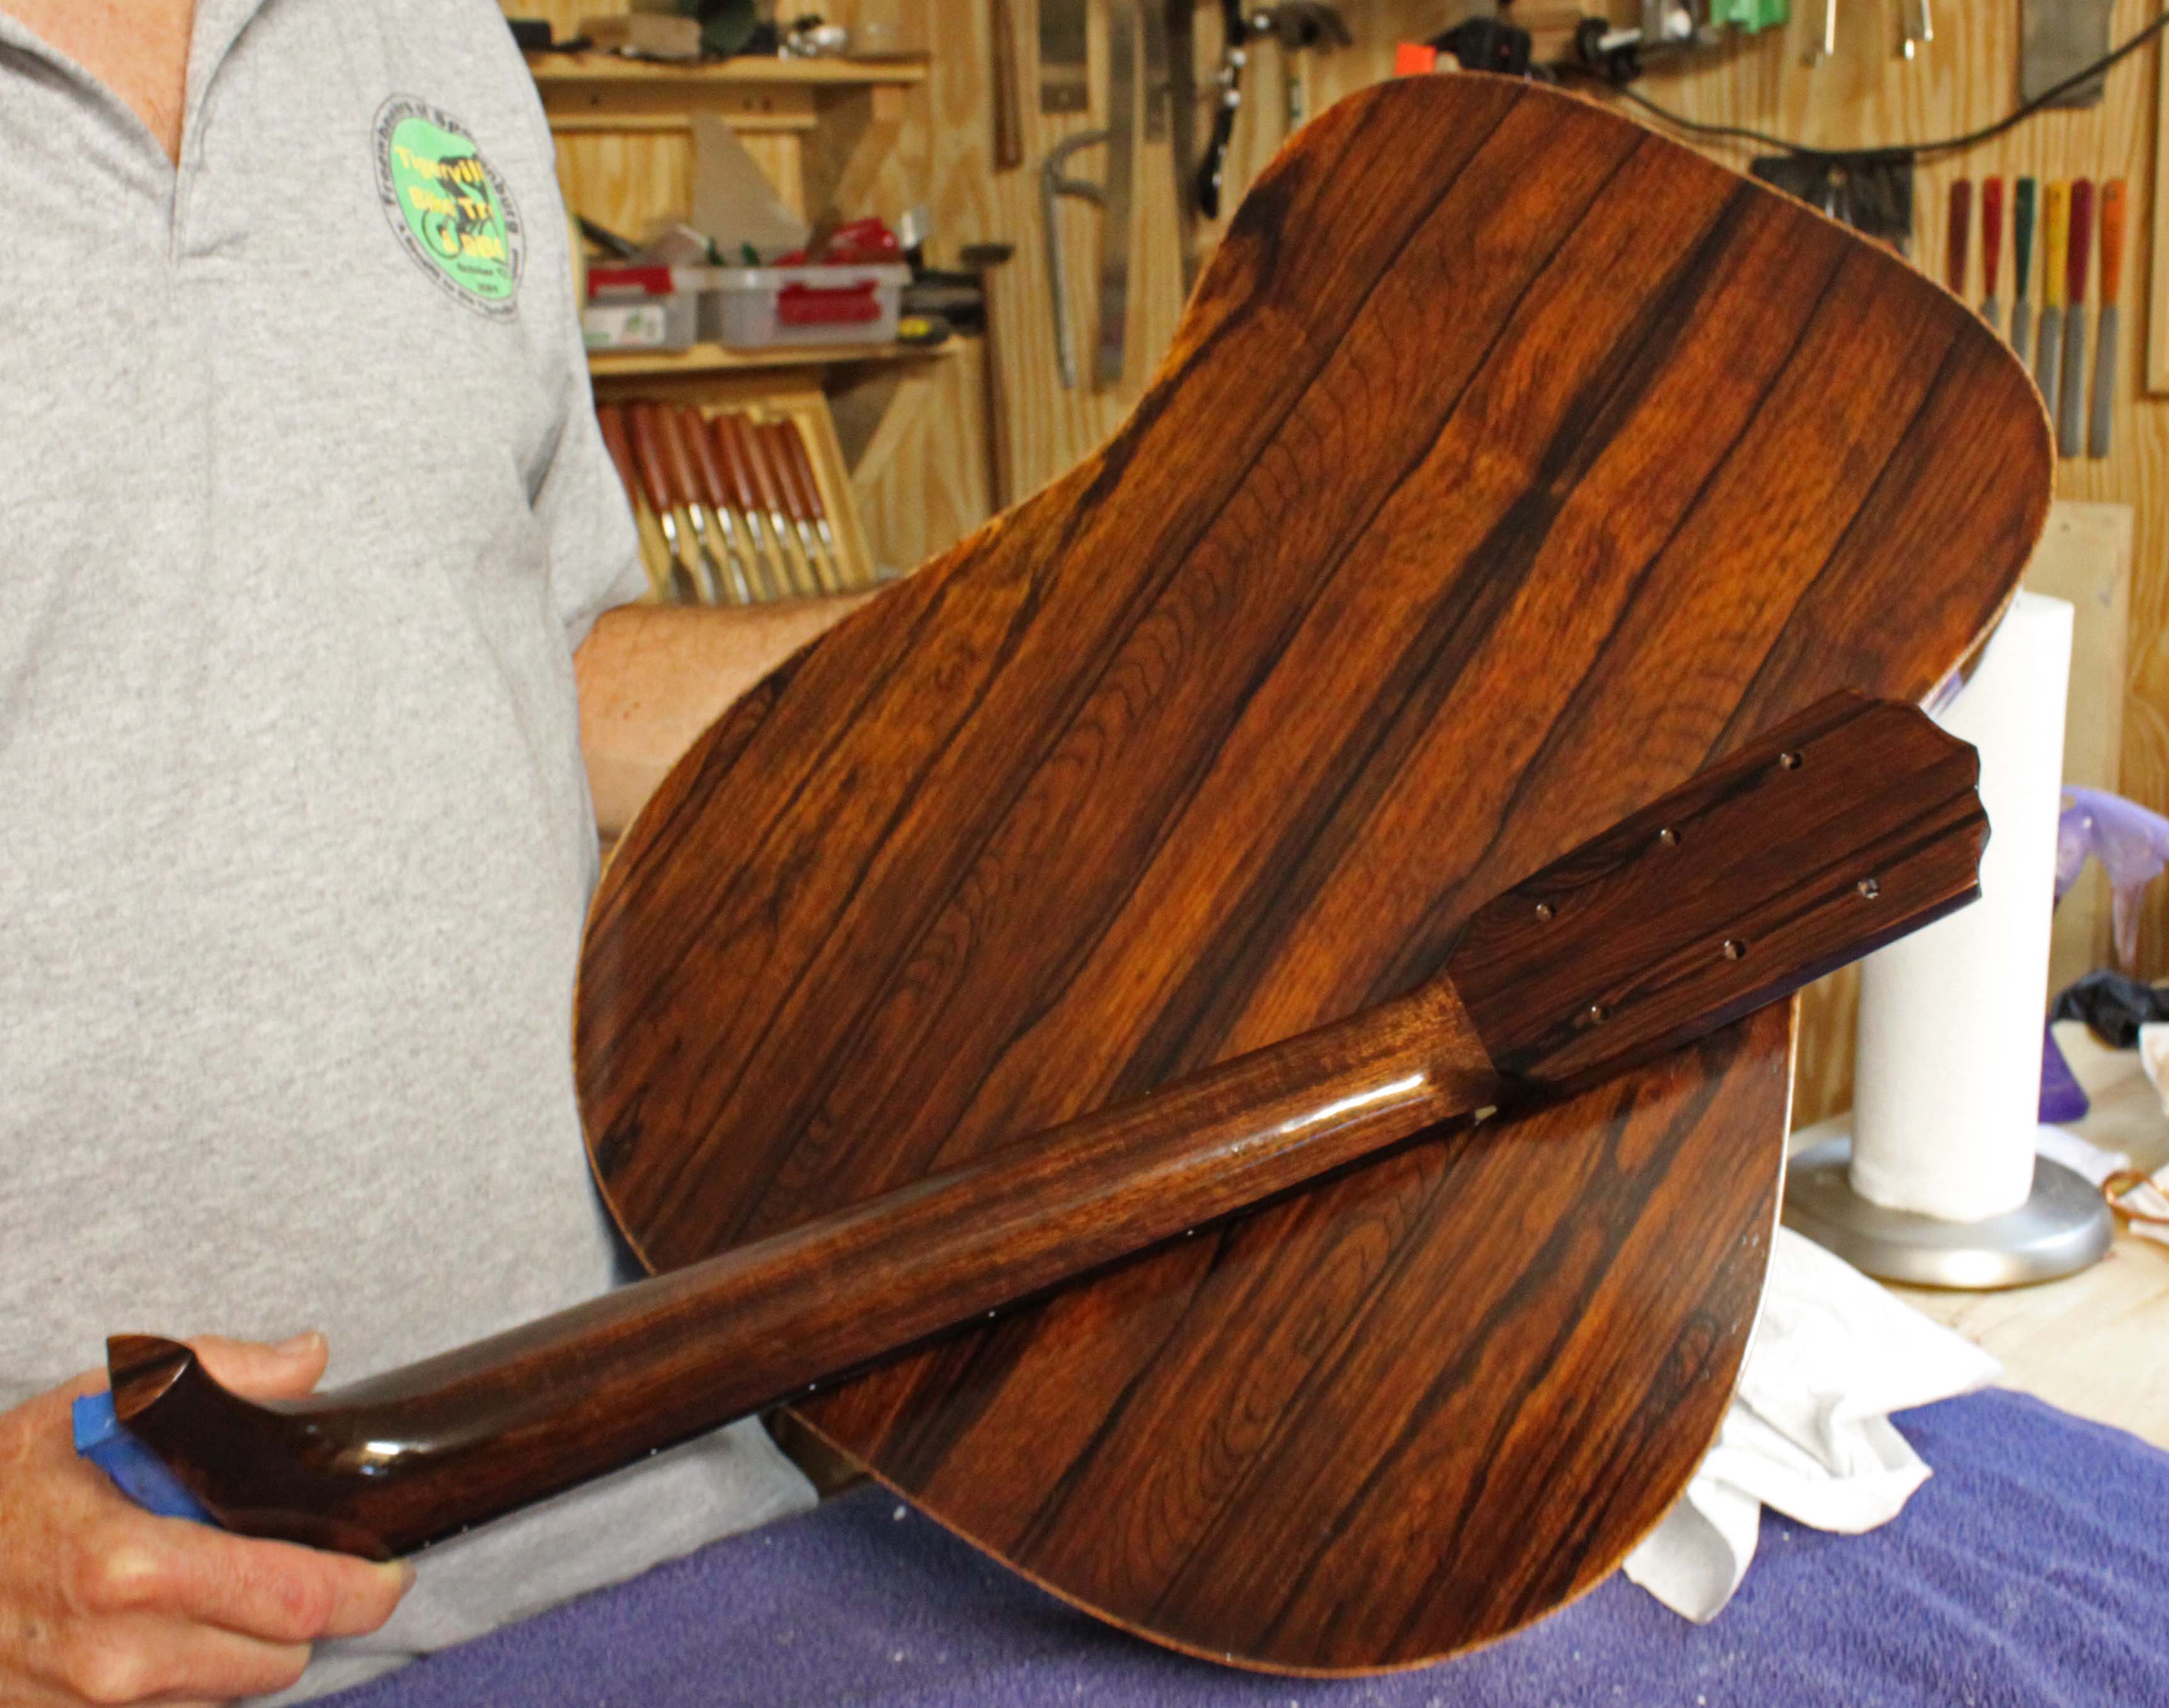 Handmade Cocobolo Acoustic Guitar - in the making